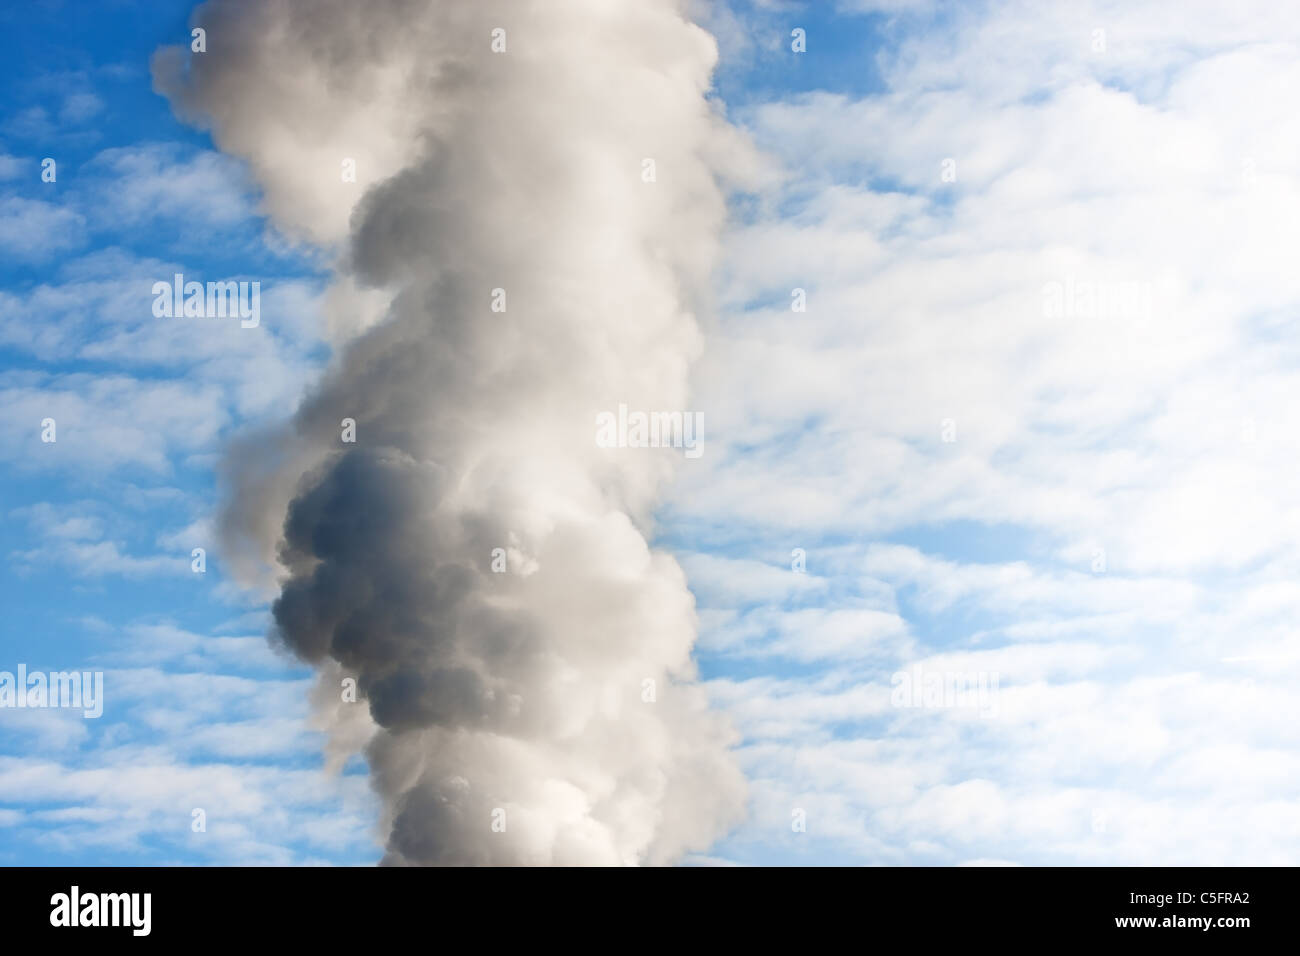 Heavy industrial pollution, environment problem Stock Photo